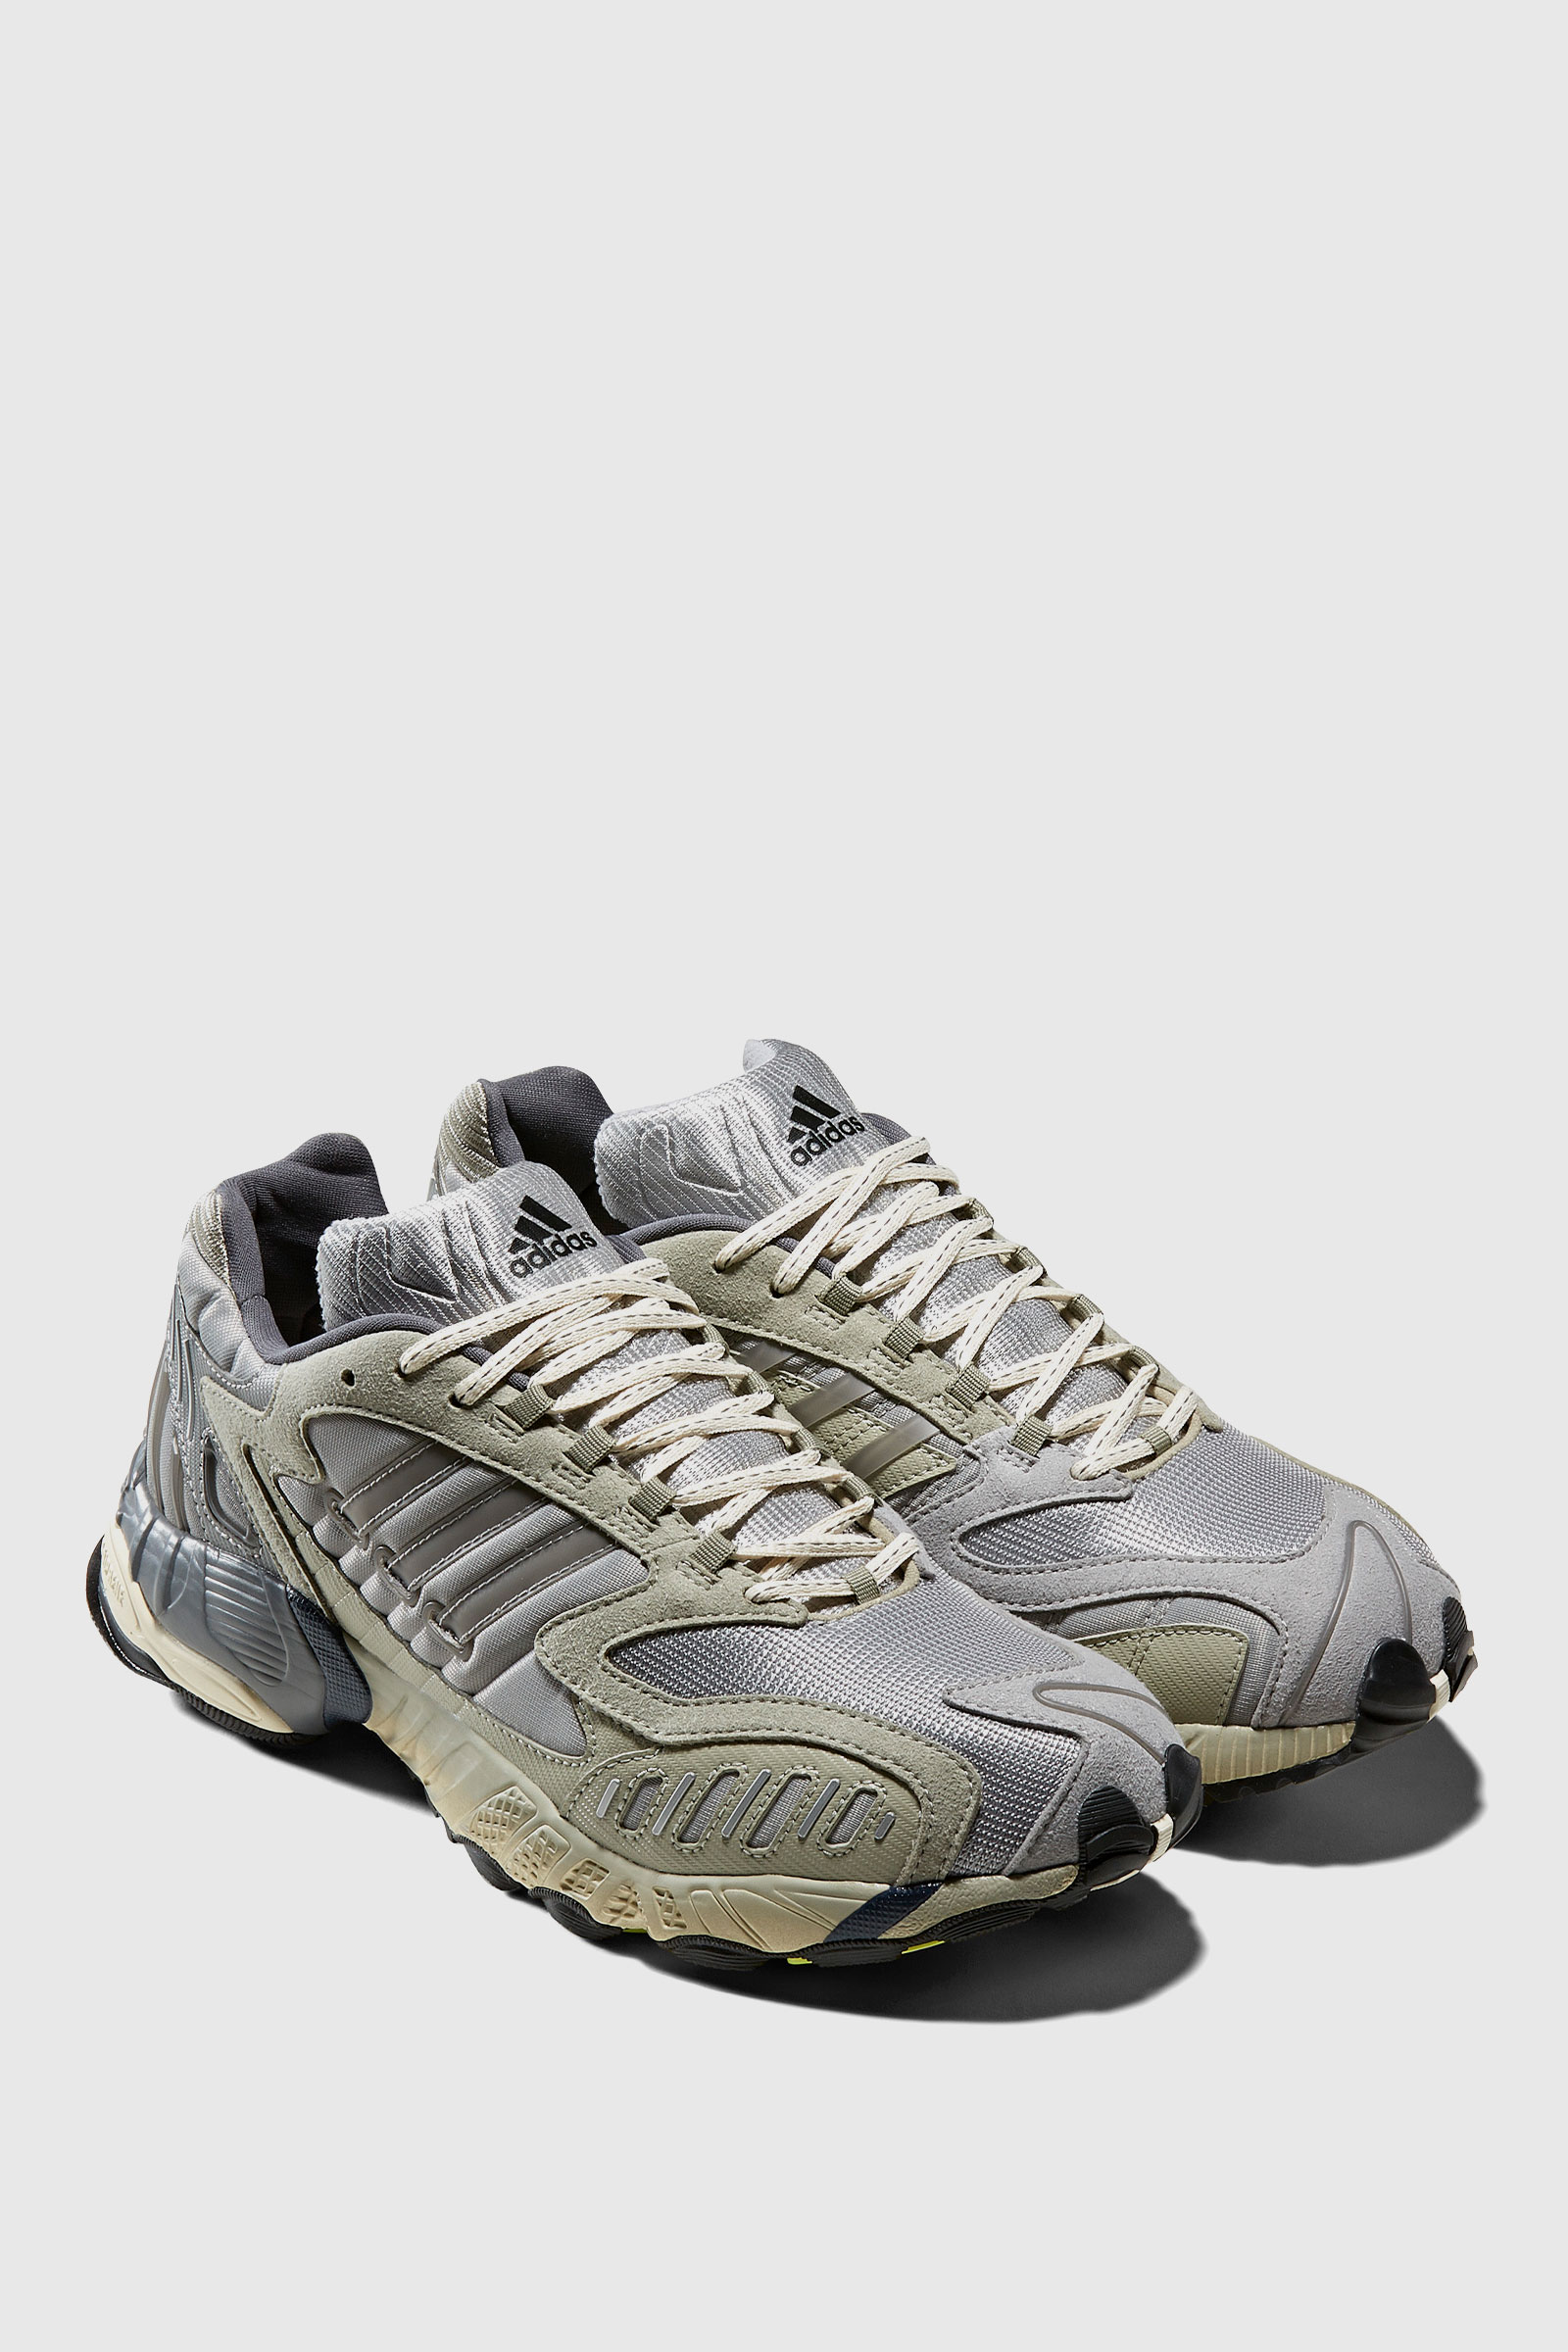 adidas torsion trdc norse projects